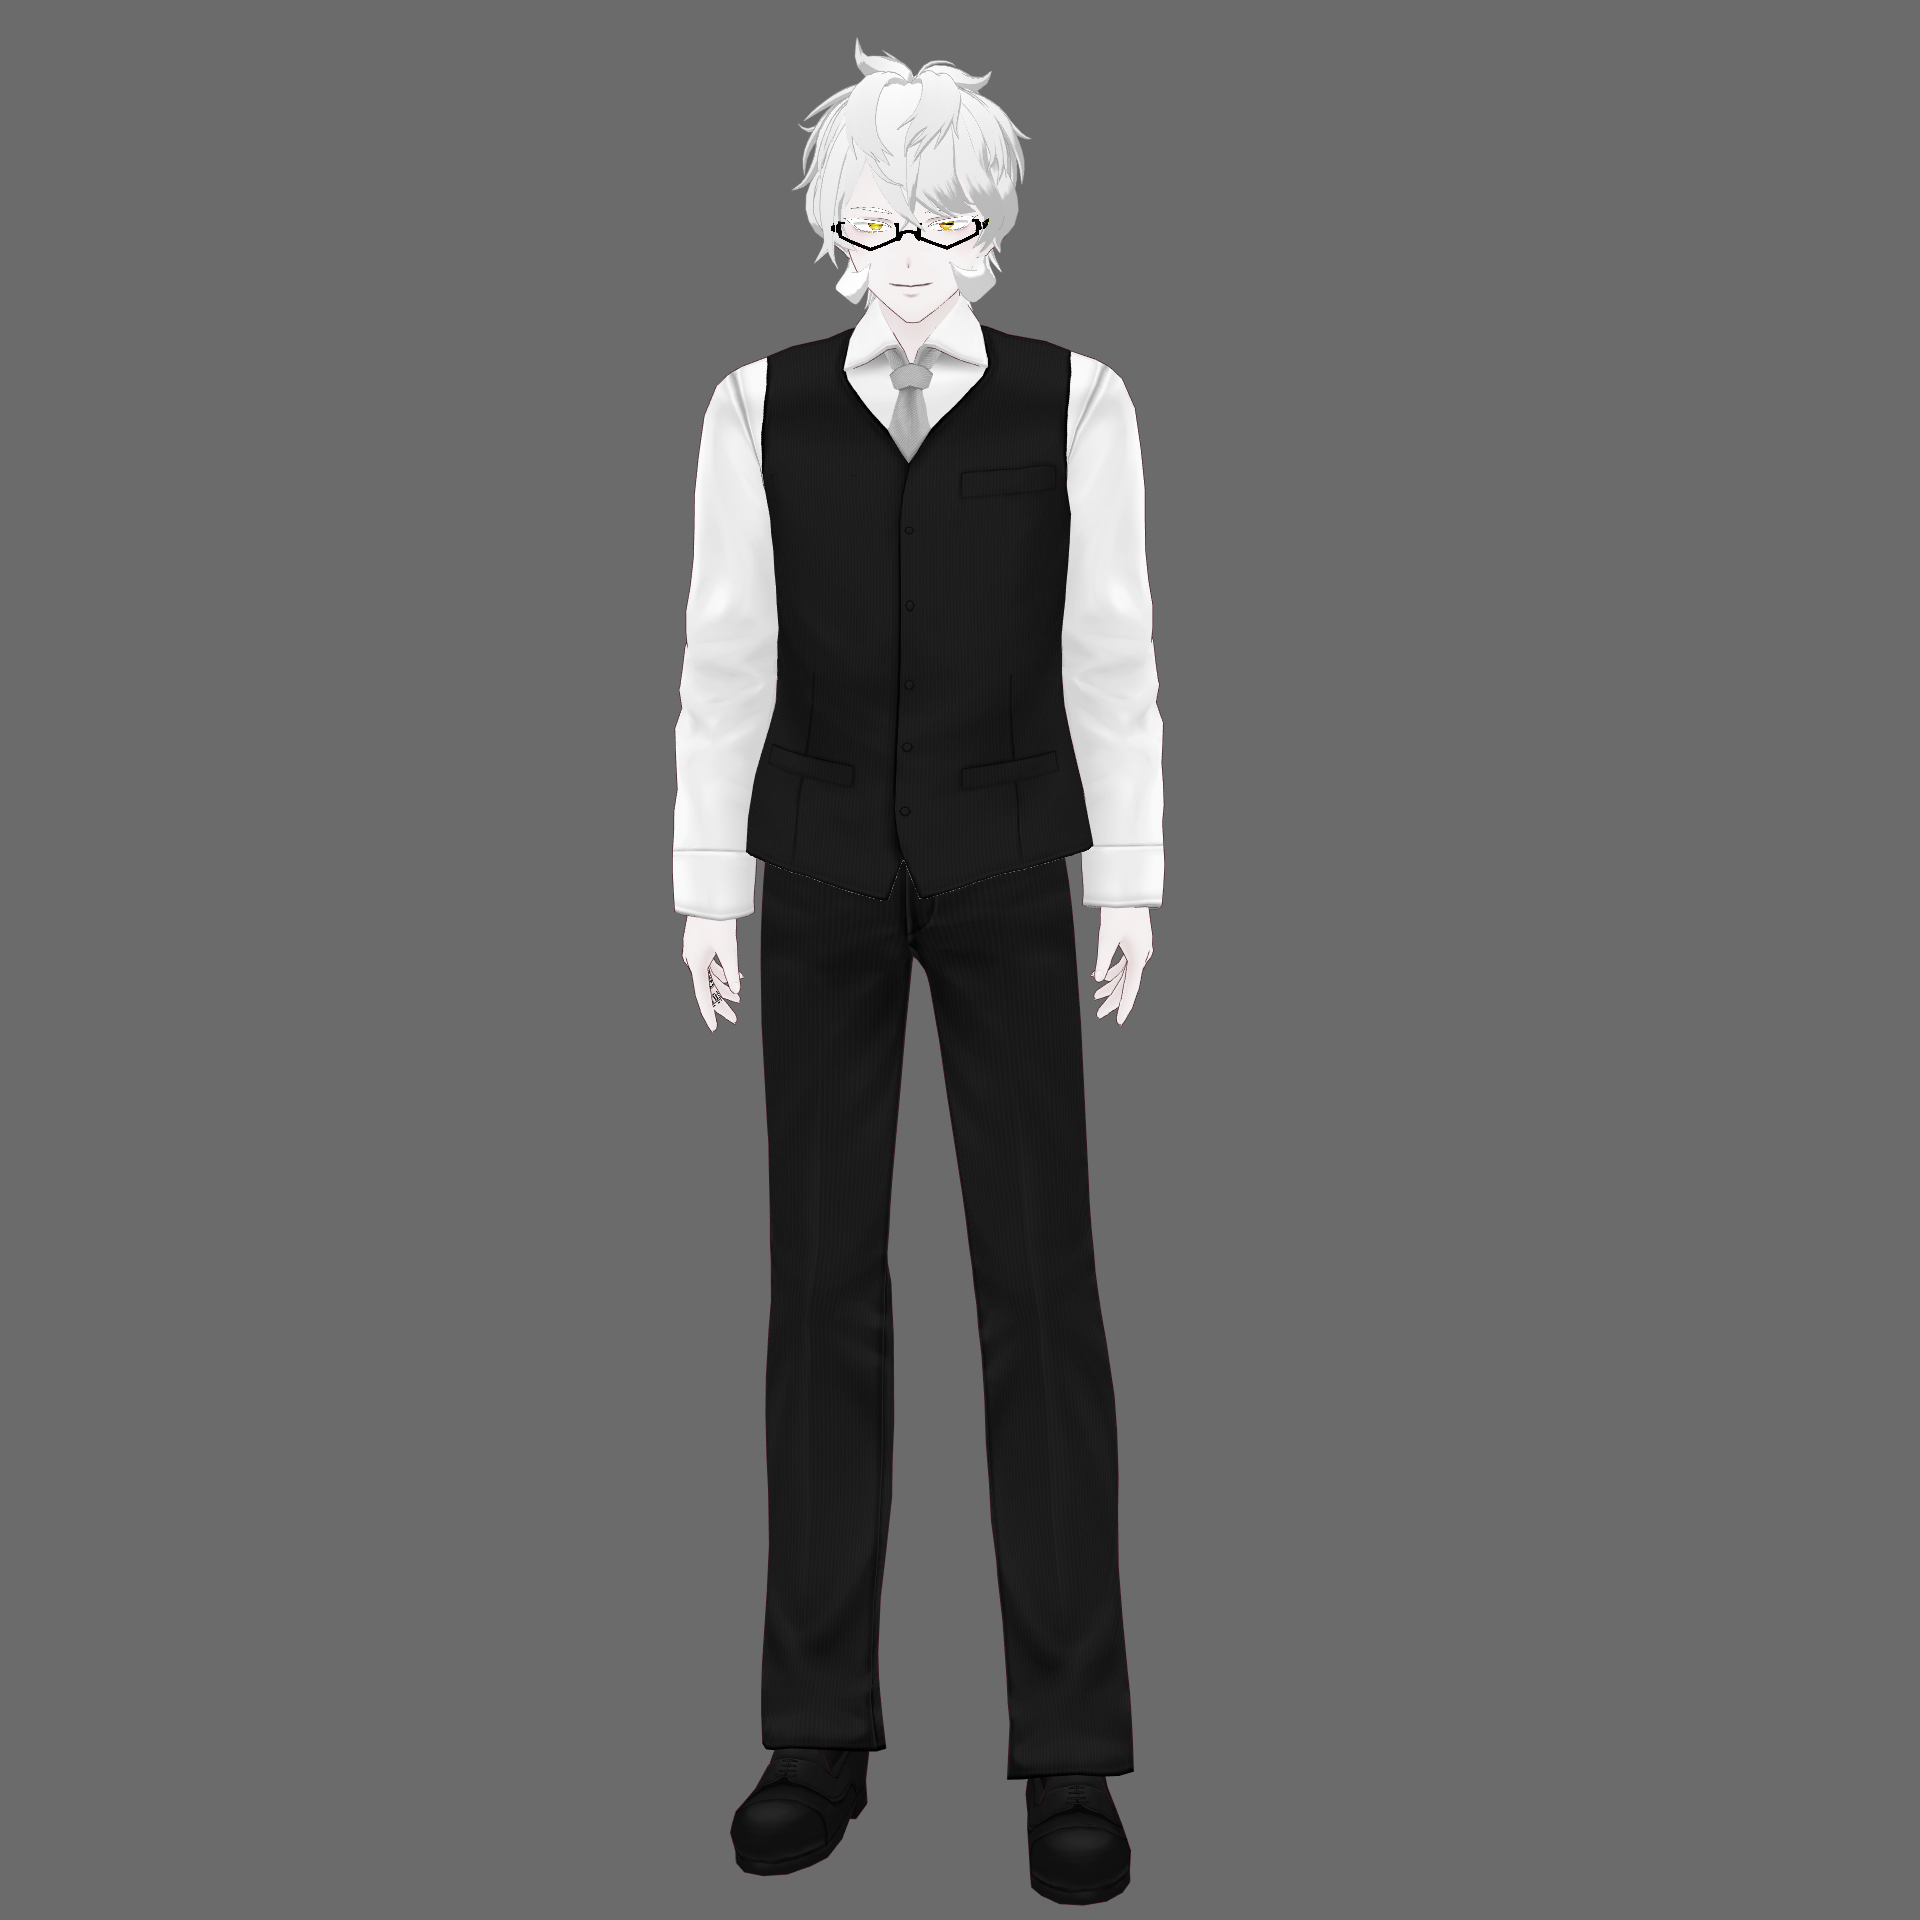 Vroid Texture Free ~ [vroid/free] Classic Three-piece Suits Black/gray ...